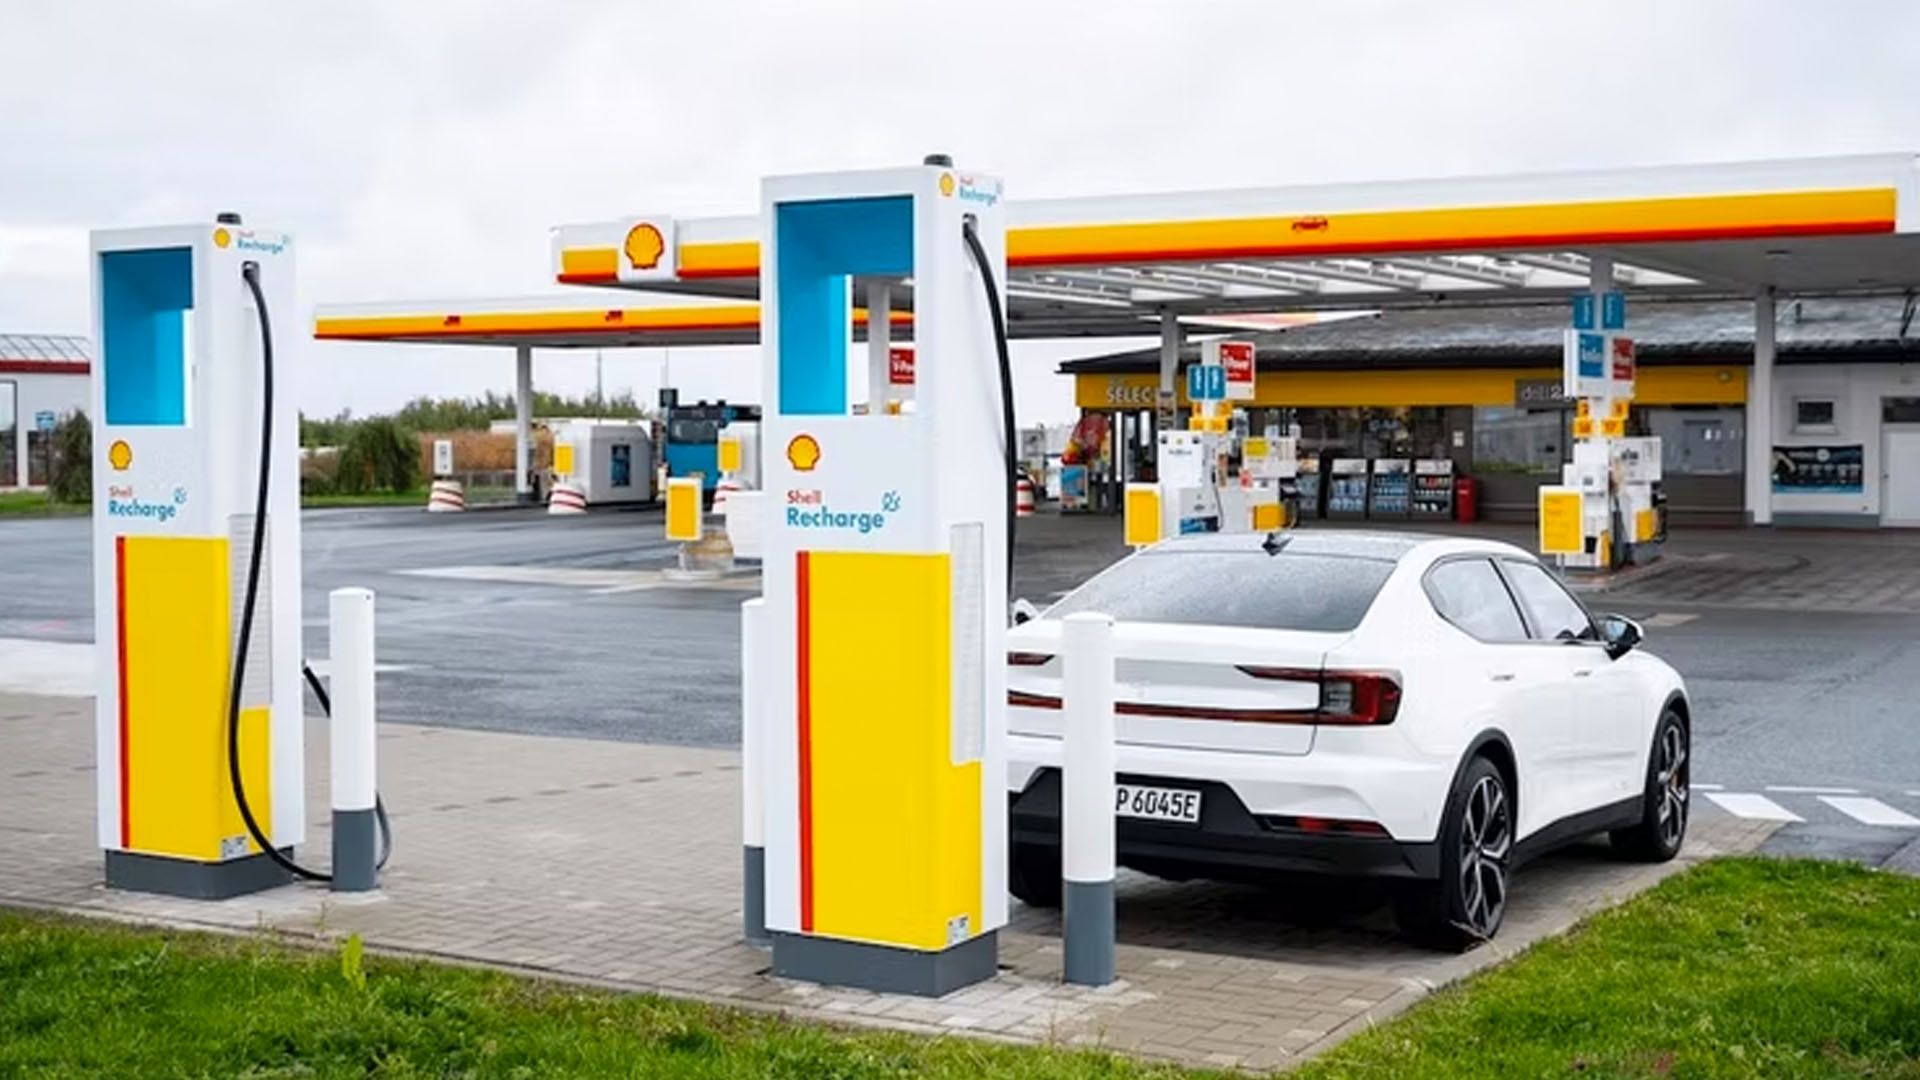 A pair of shell recharge charging stations with a car plugged in.